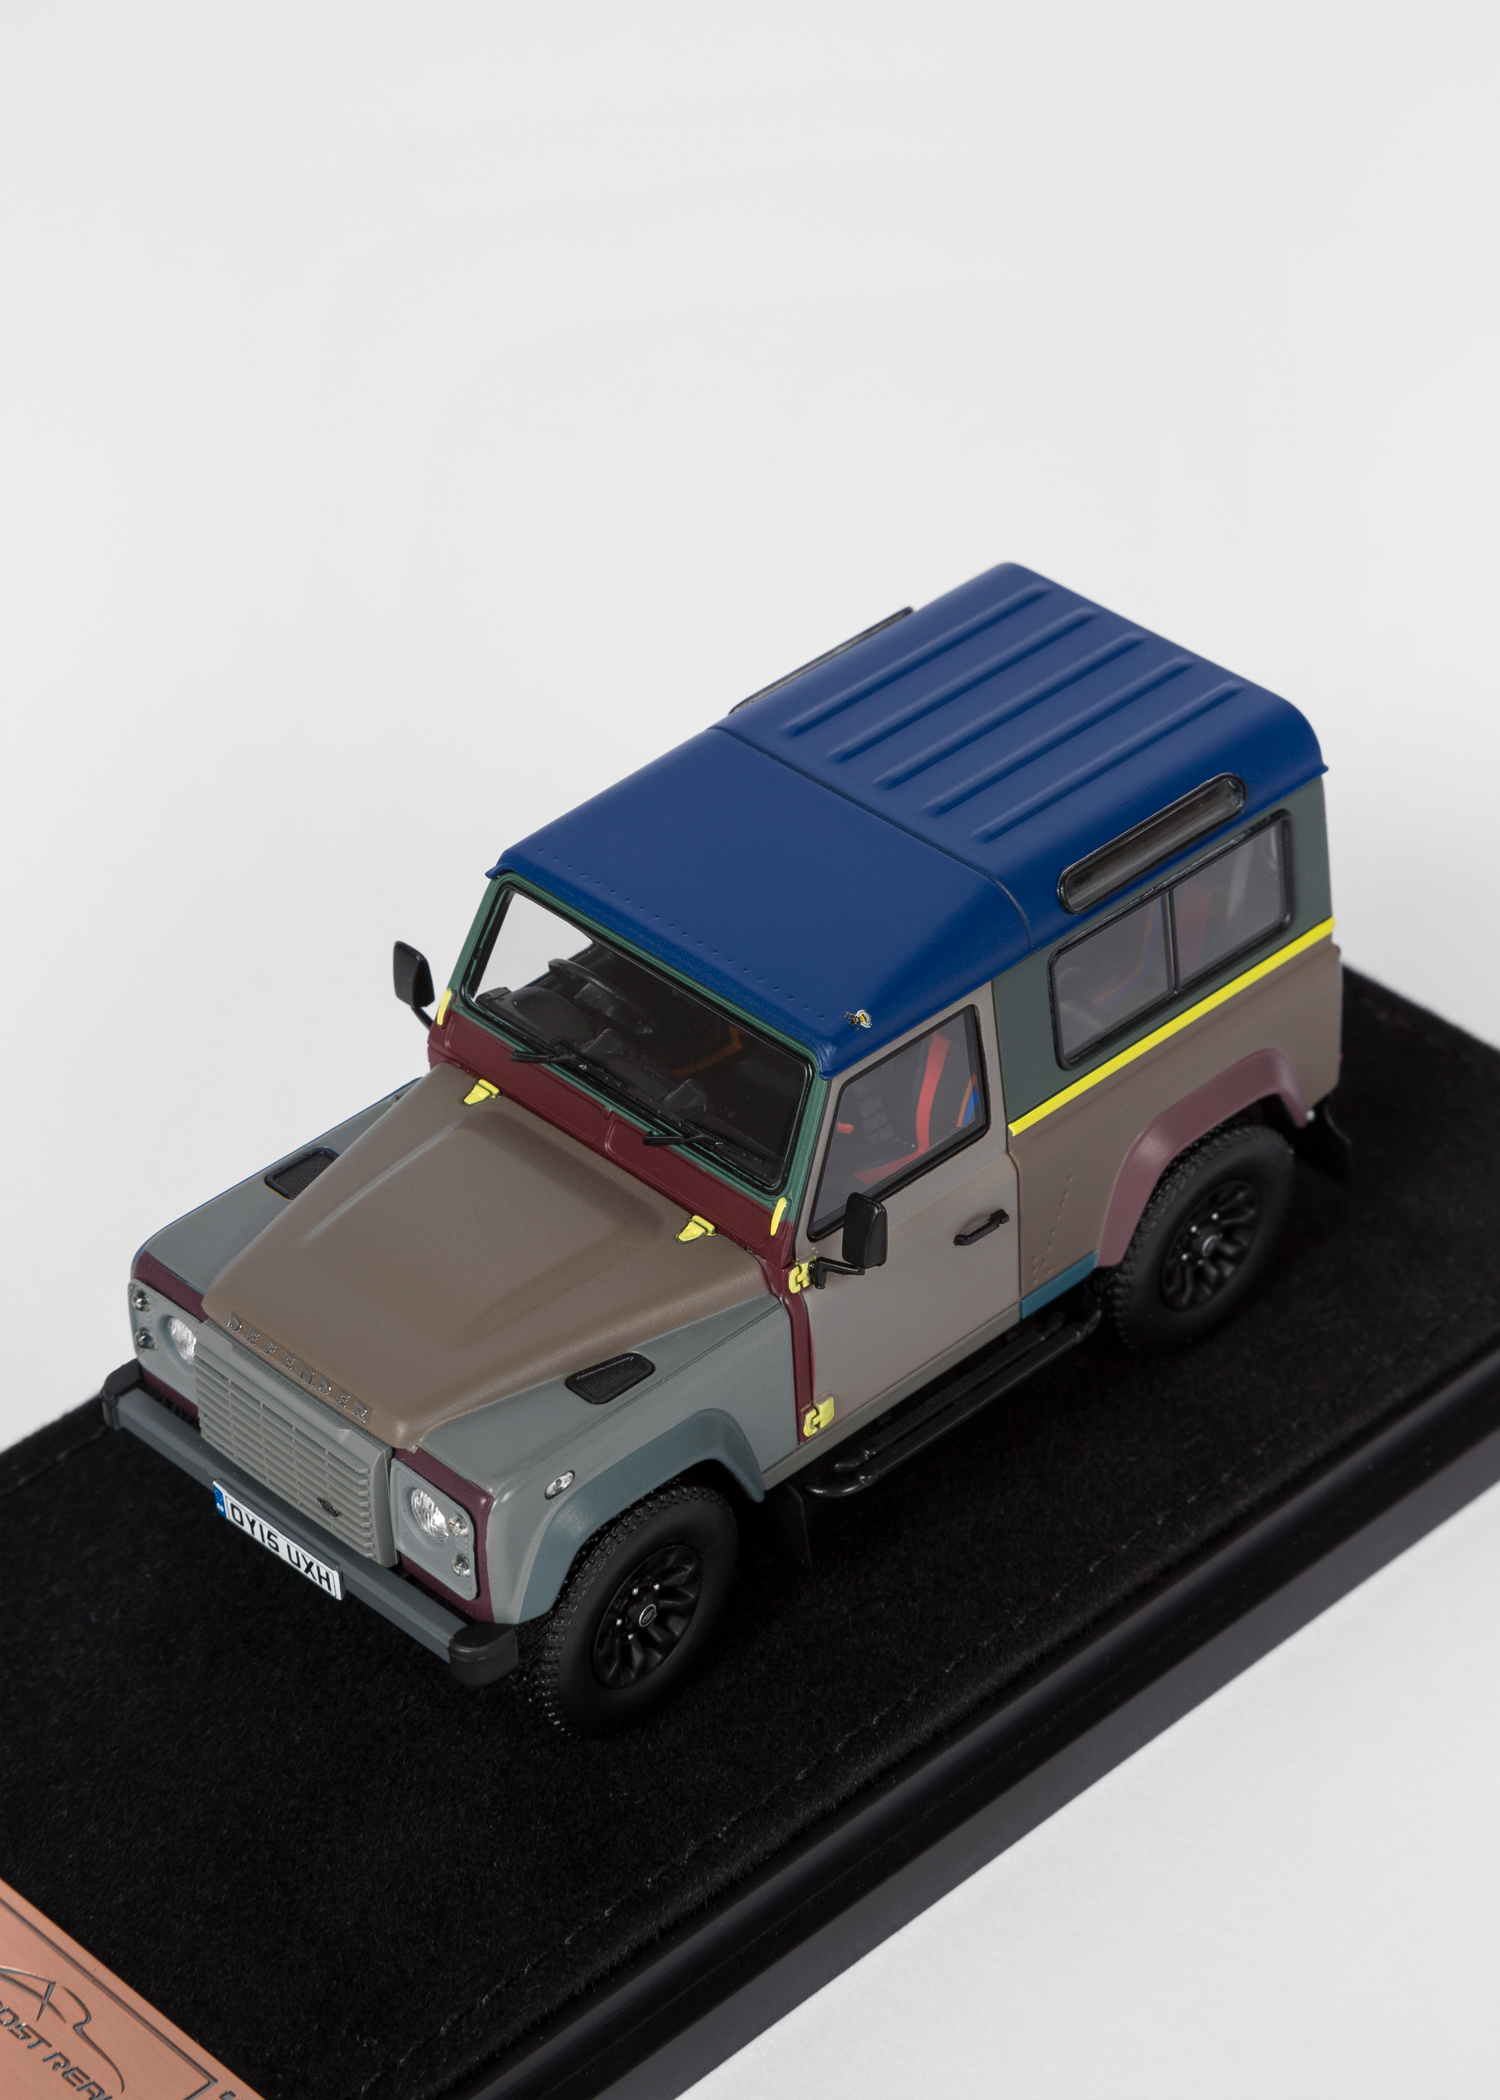 Angled view - Paul Smith + Land Rover - Defender 90 1:43 Die Cast Metal Collector's Edition 